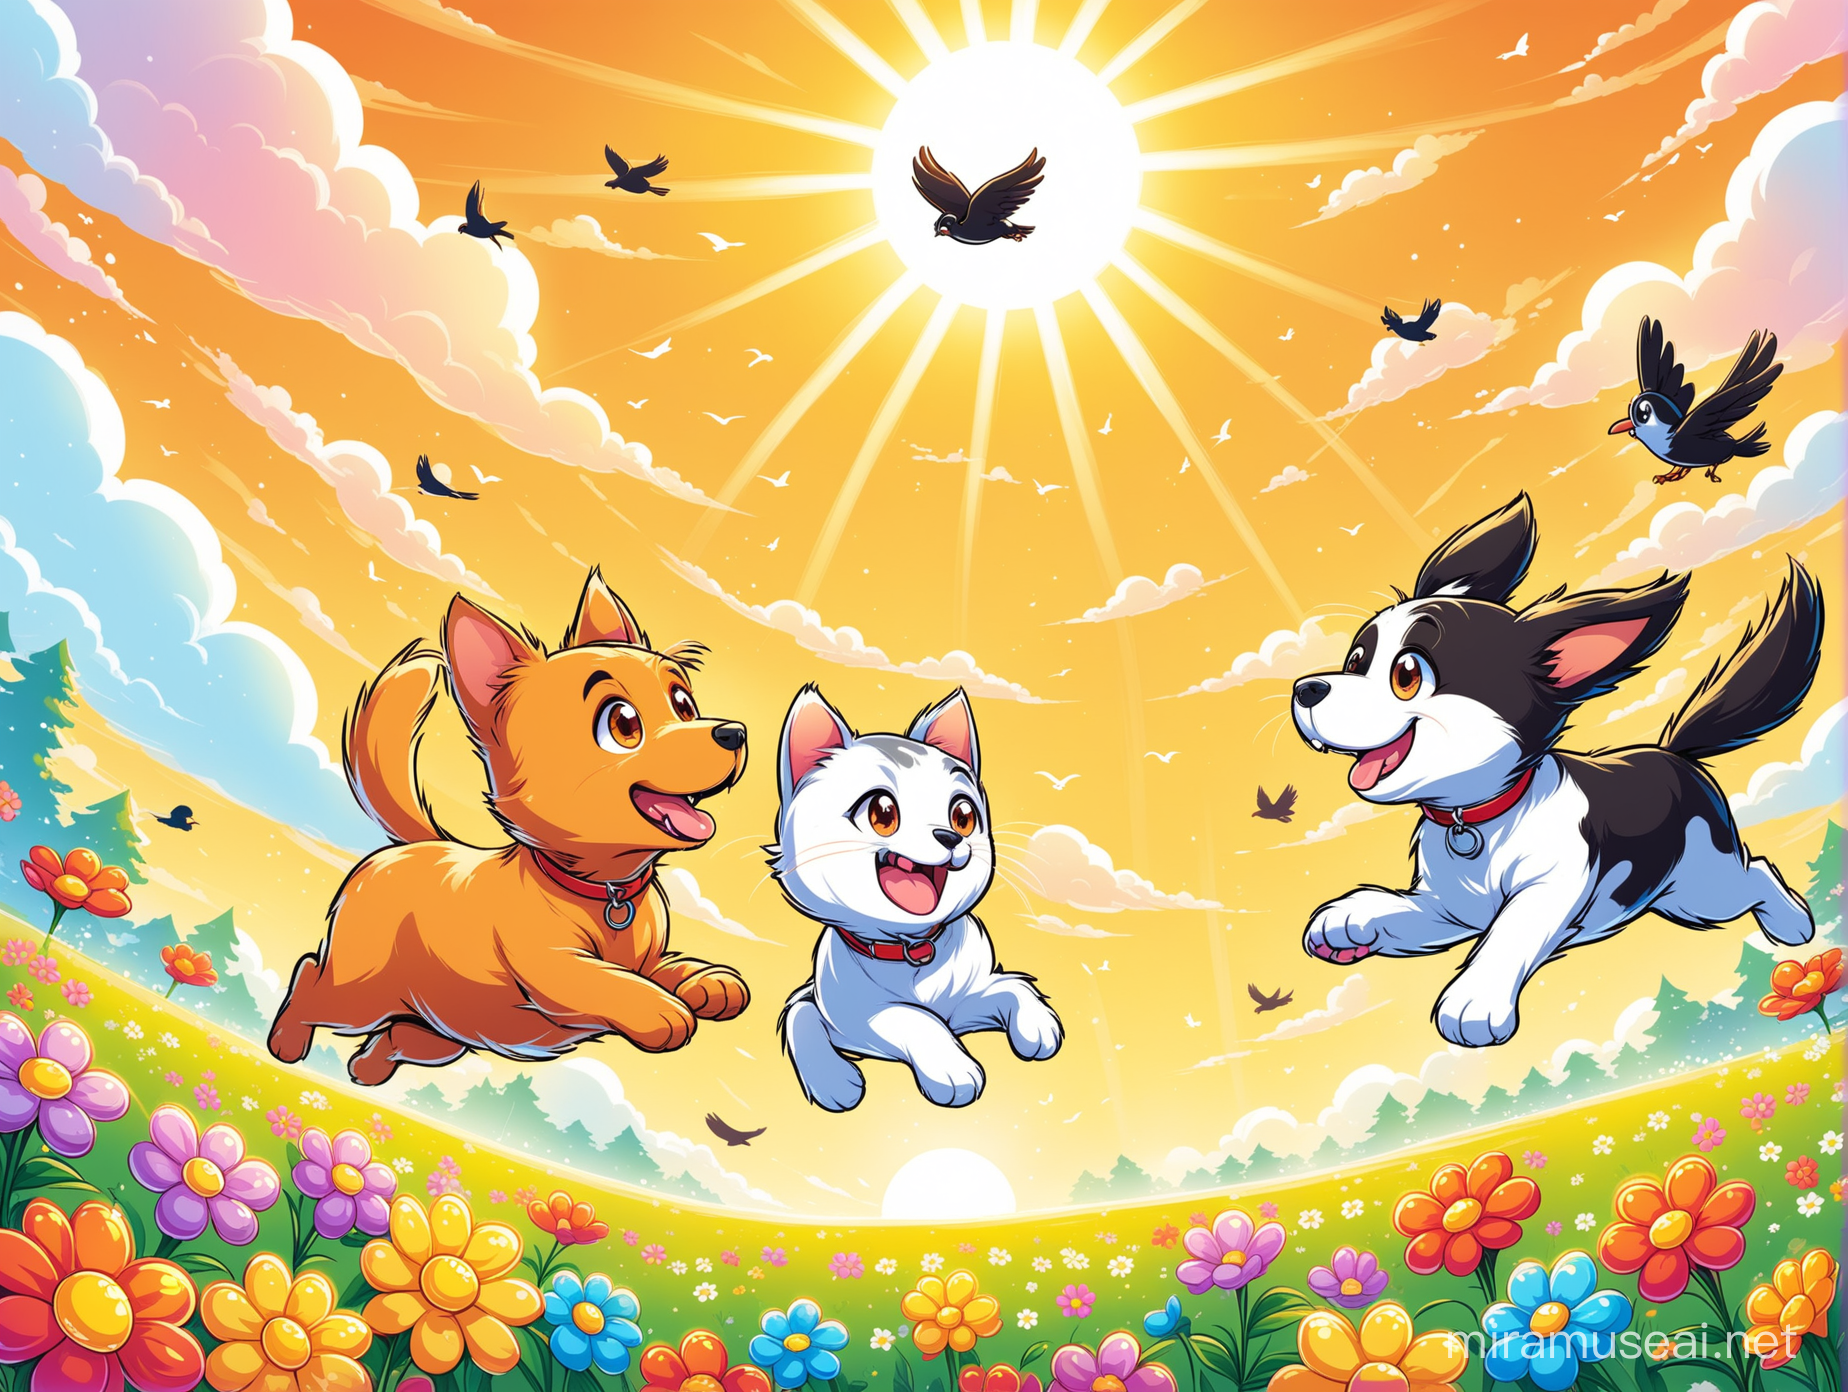 Playful Dogs Chasing a Cat in Vibrant Cartoon Style with Sunny Day Background